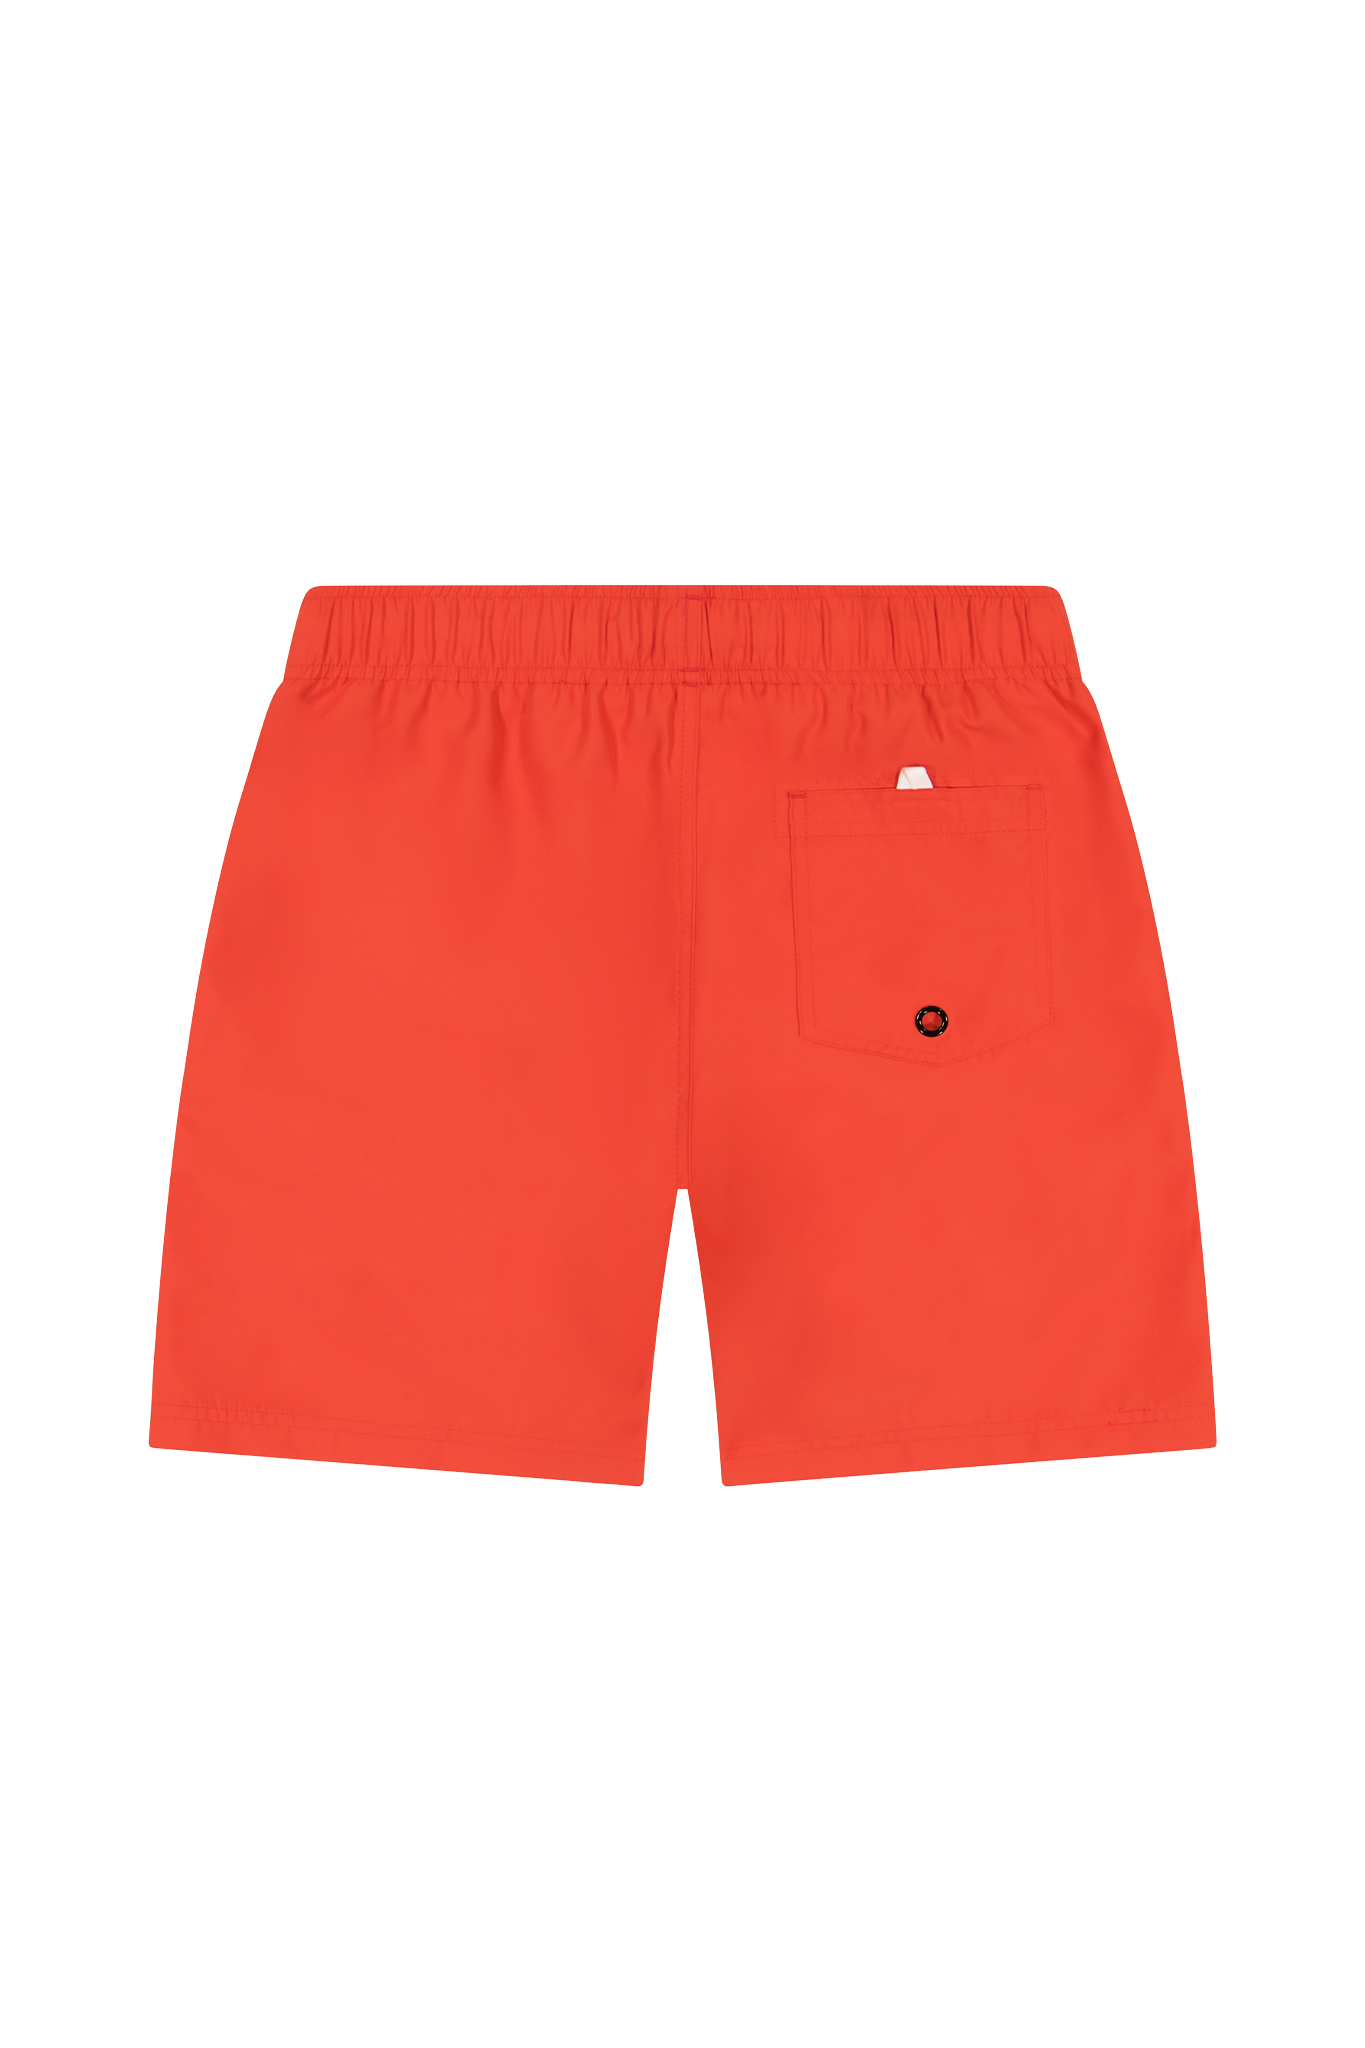 All Day Trunk - Red